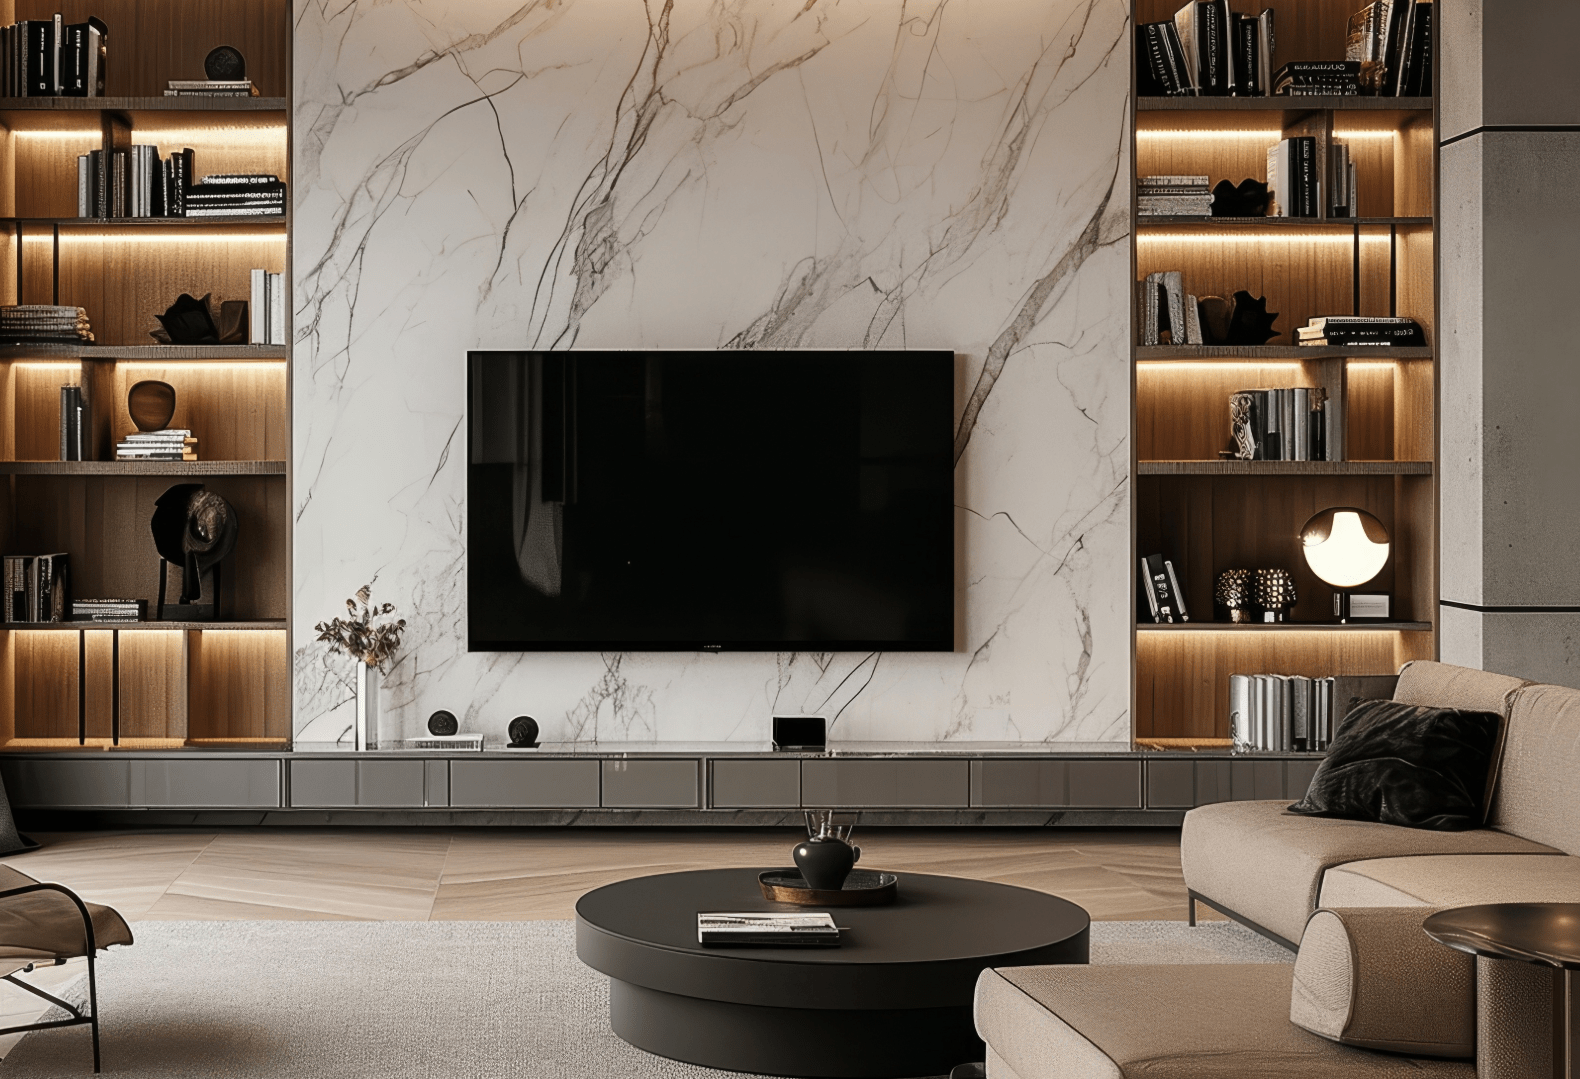 Wide shot of a small room with modern TV wall design, porcelain tile